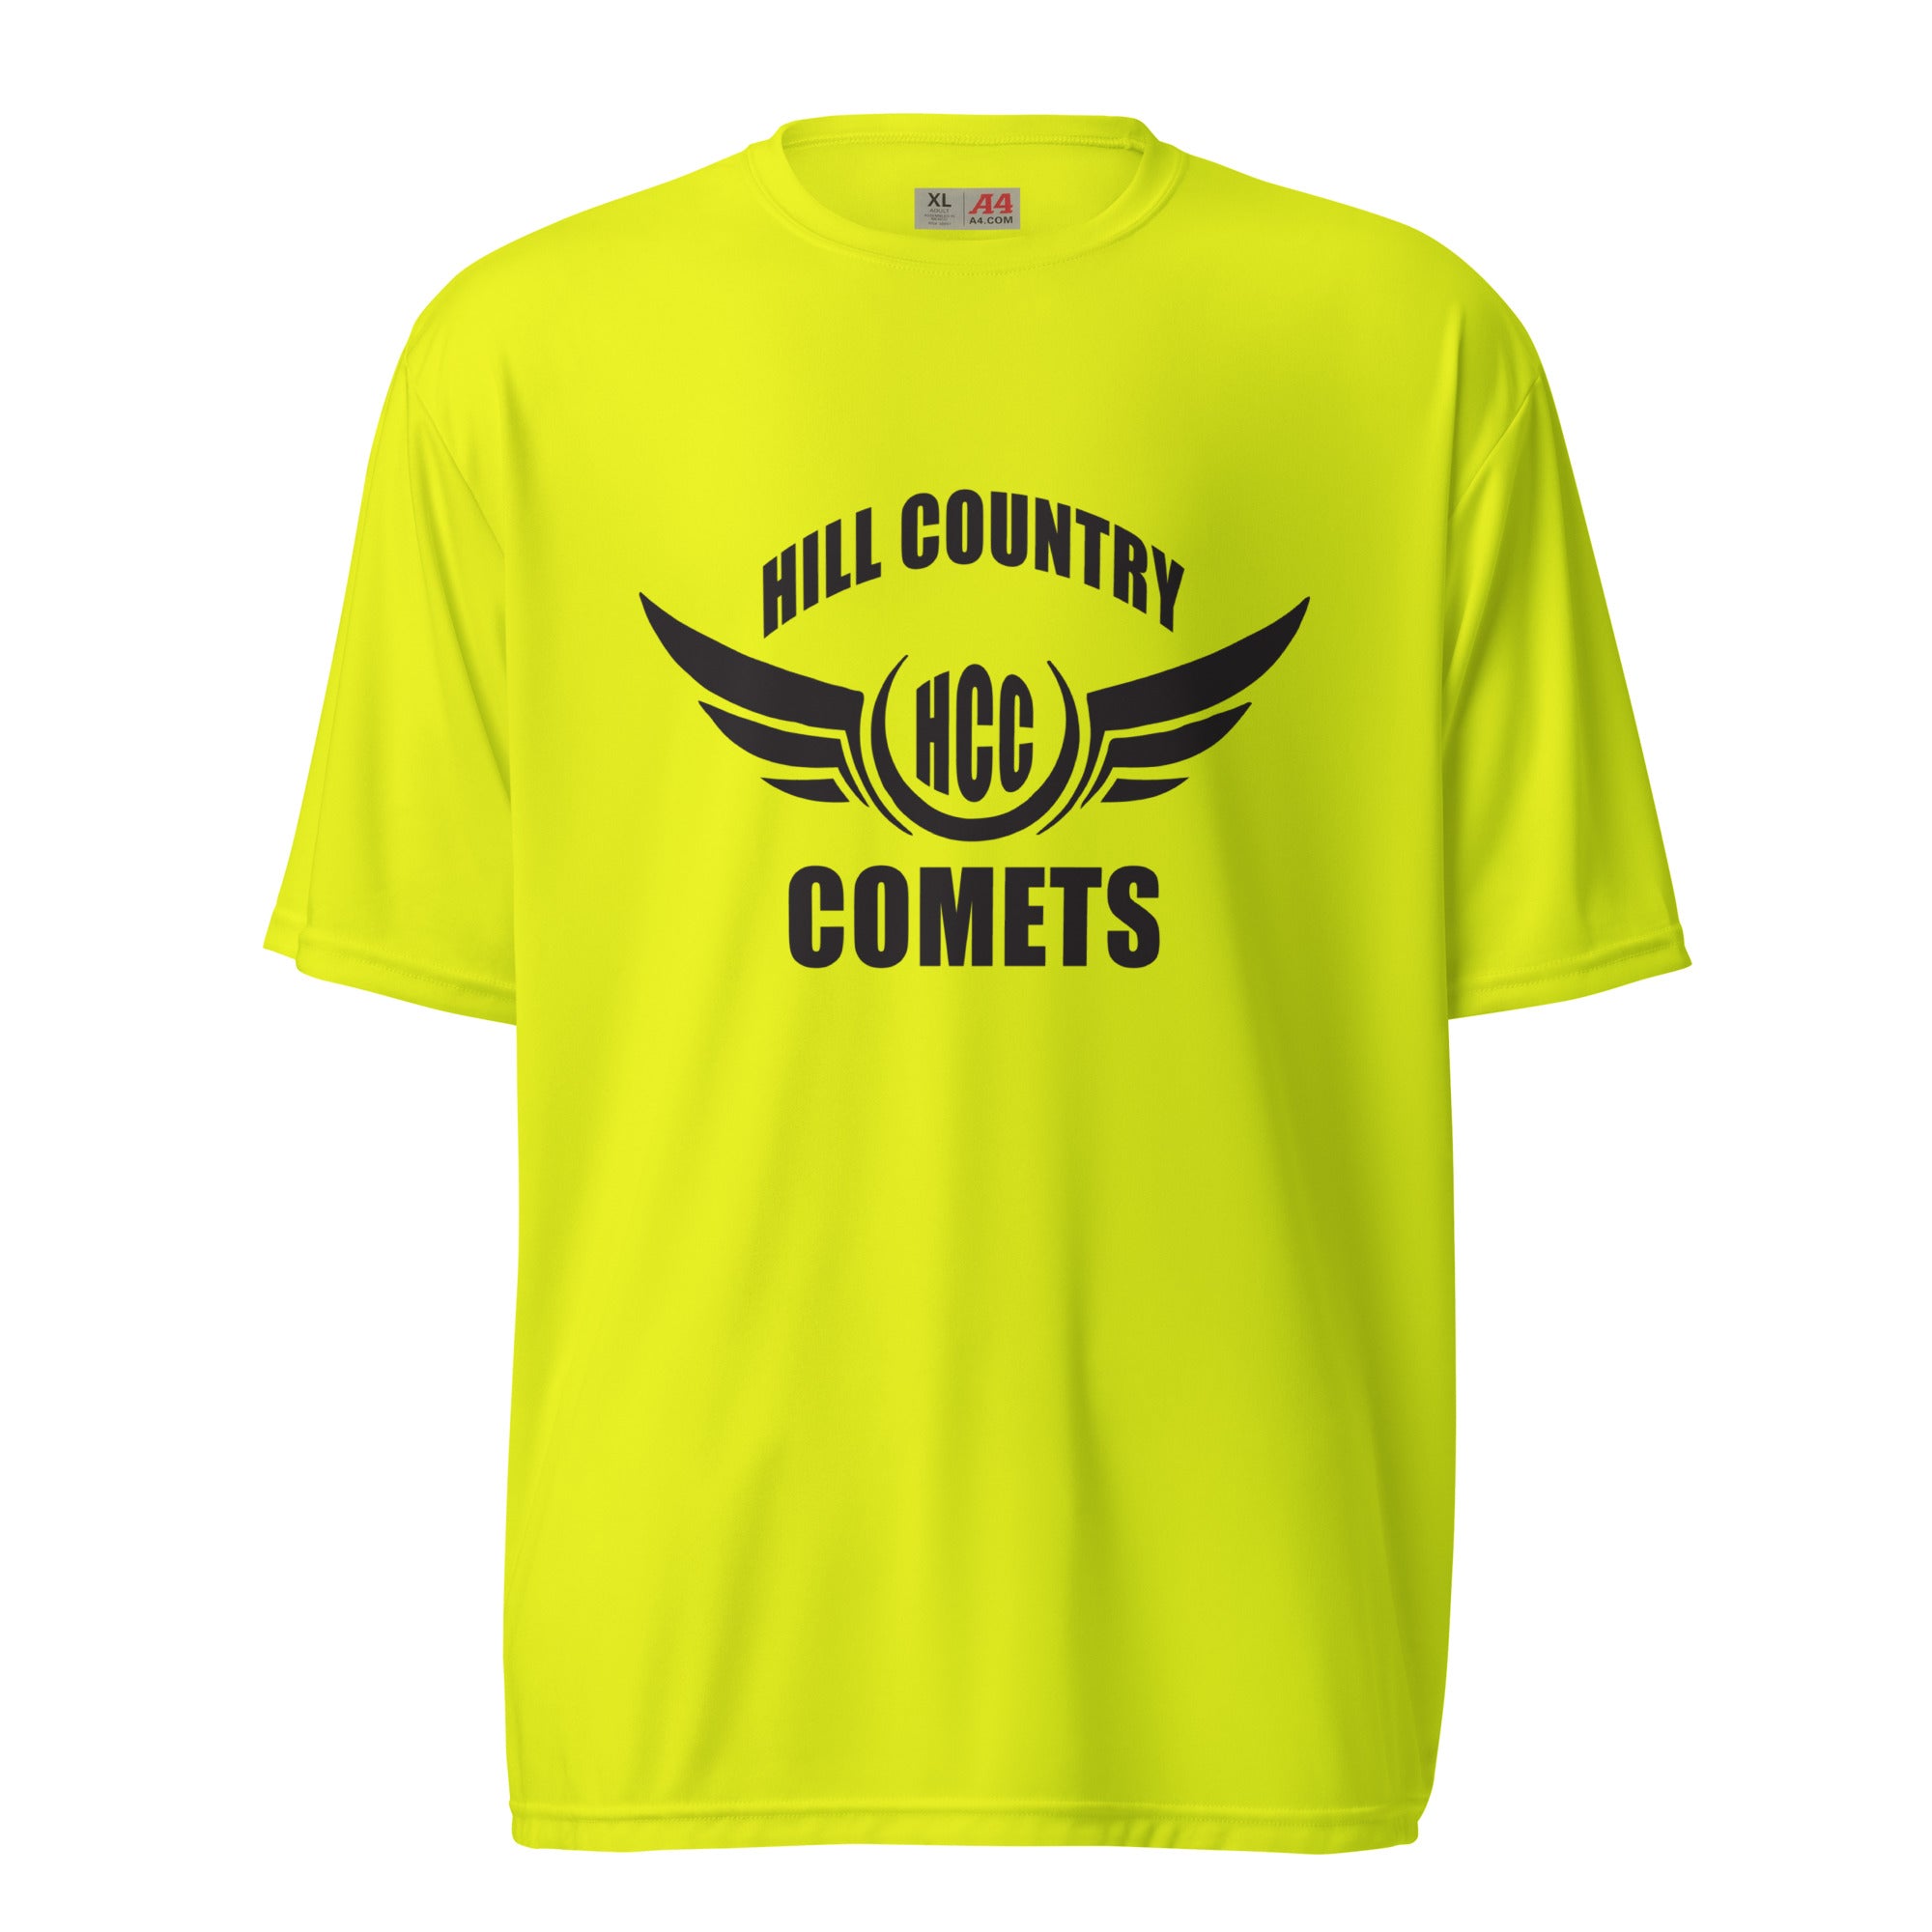 Hill Country Comets Unisex Performance Crew Neck T-shirt